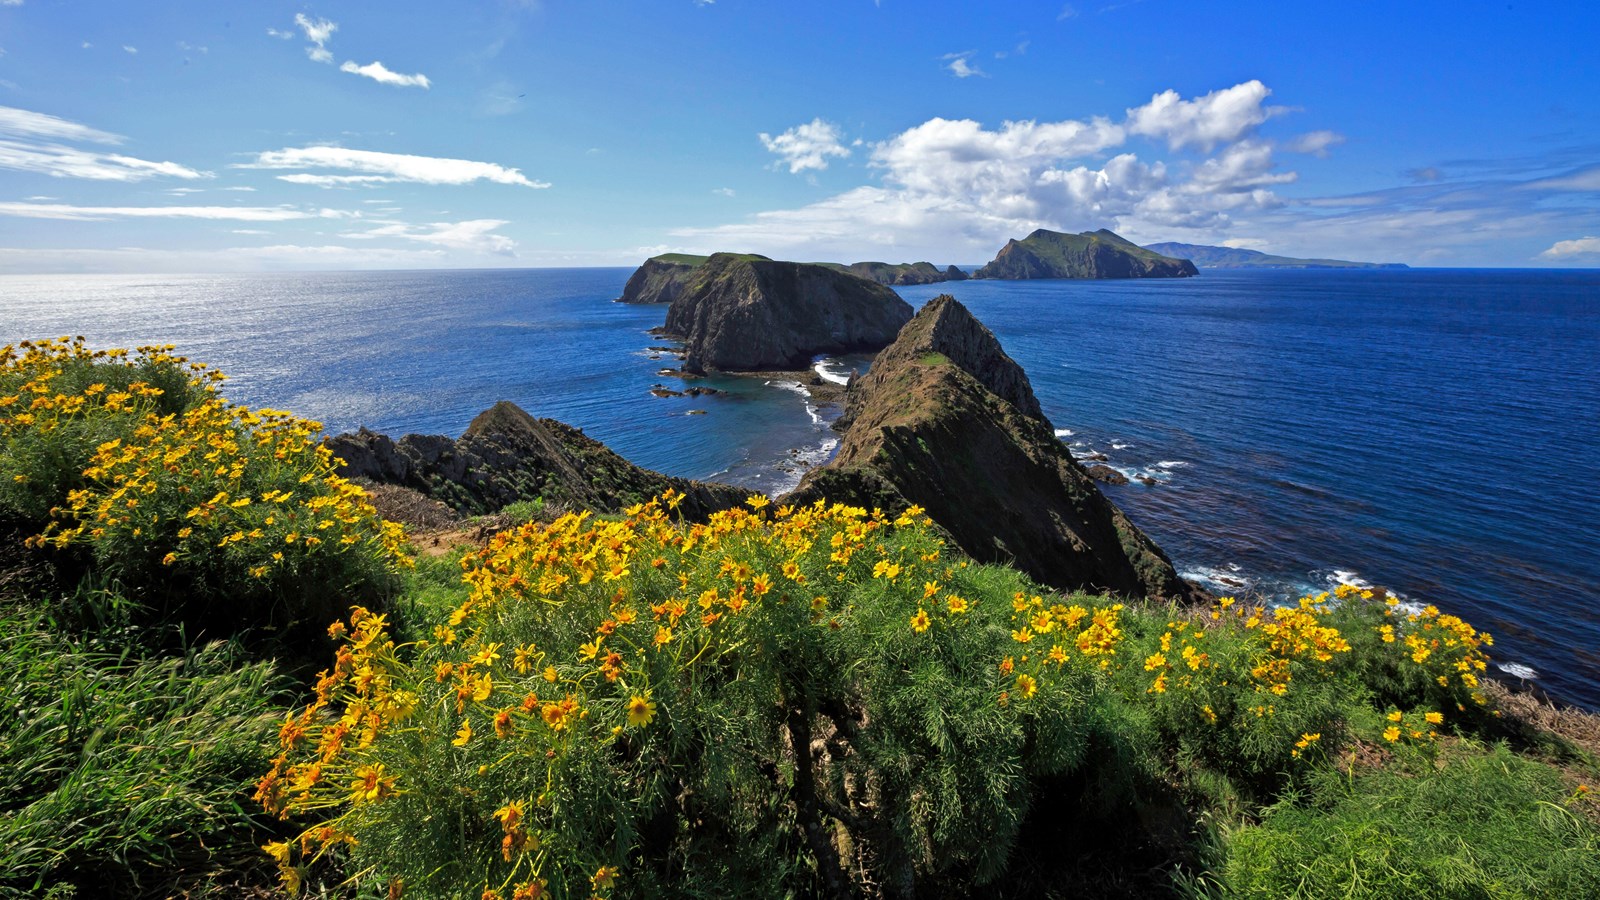 View of 3 islands in blue water with yellow flowers in the foreground. 